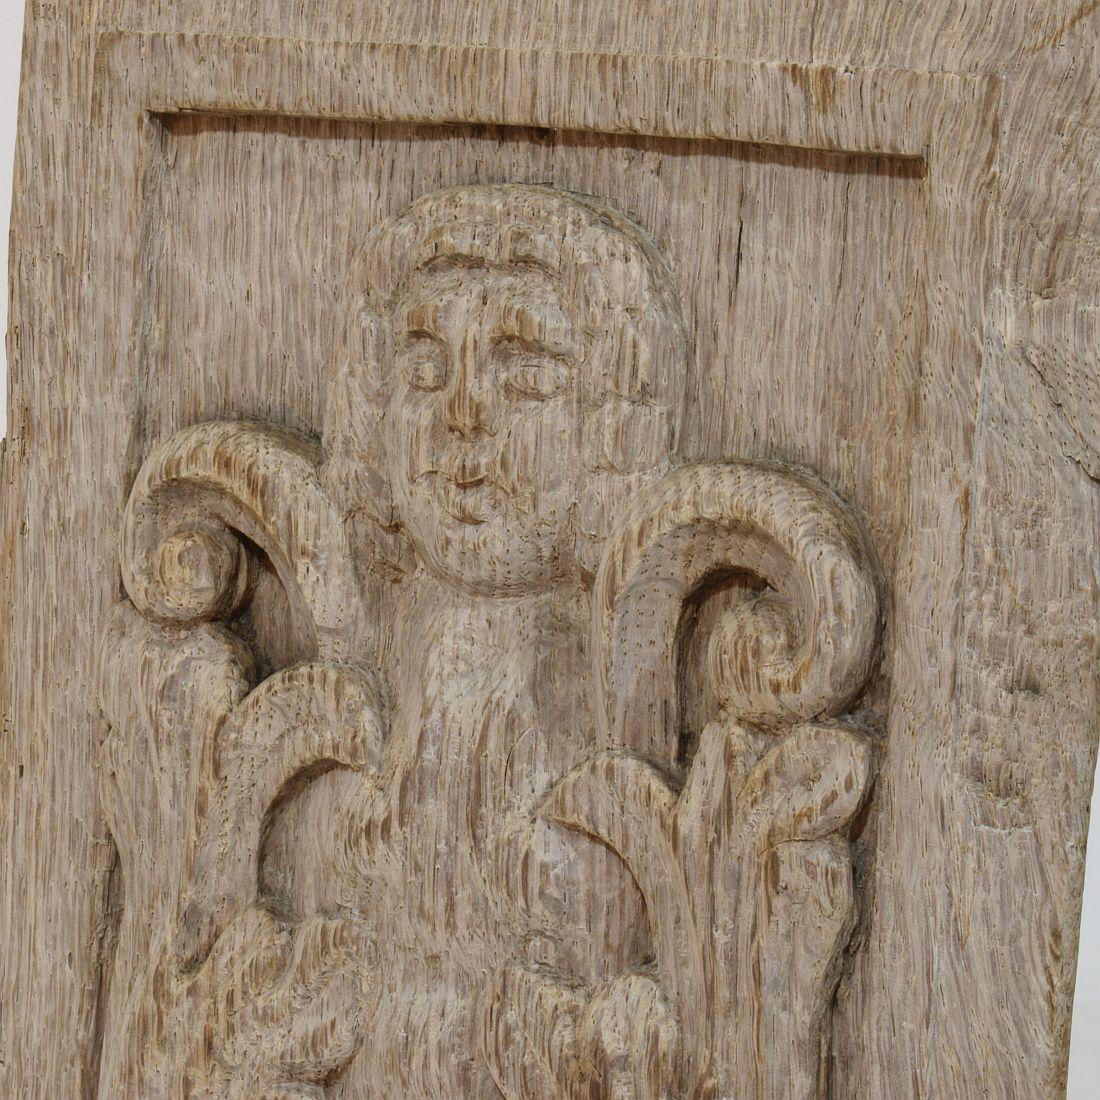 16th-17th Century French Carved Oak Panel with an Angel Figure For Sale 6